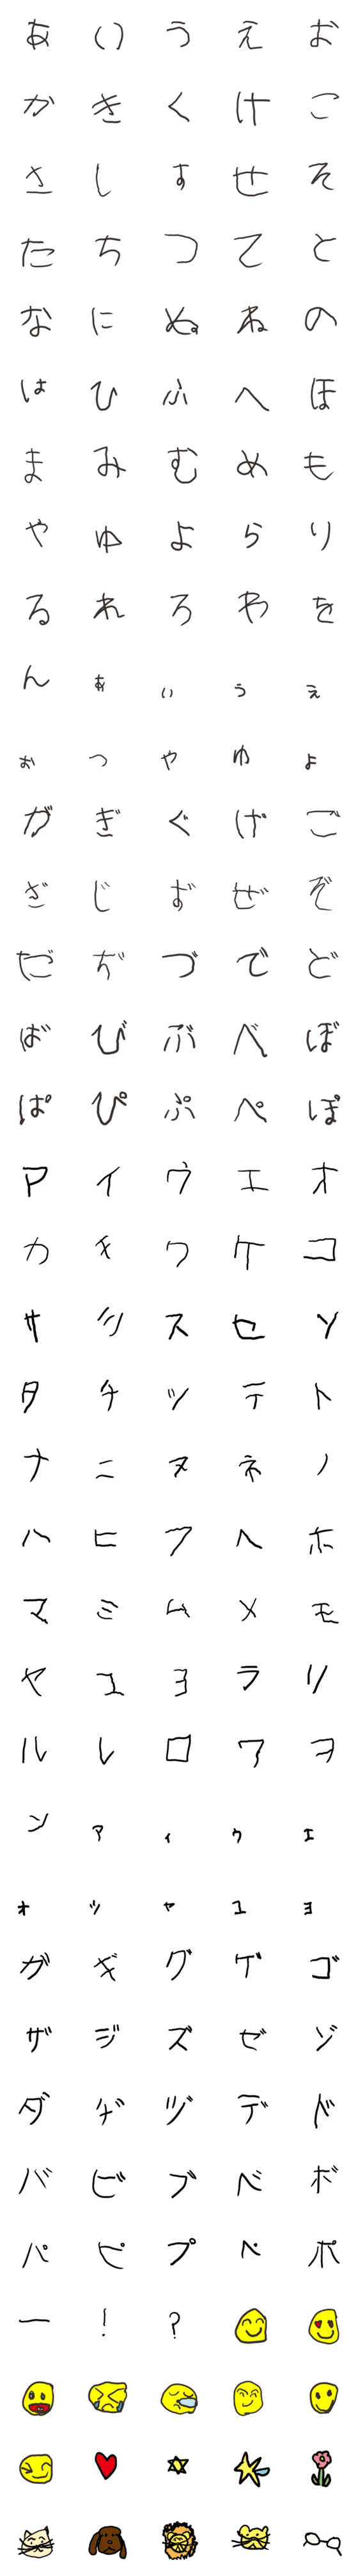 [LINE絵文字]◆こども文字＋絵文字/5歳◆の画像一覧